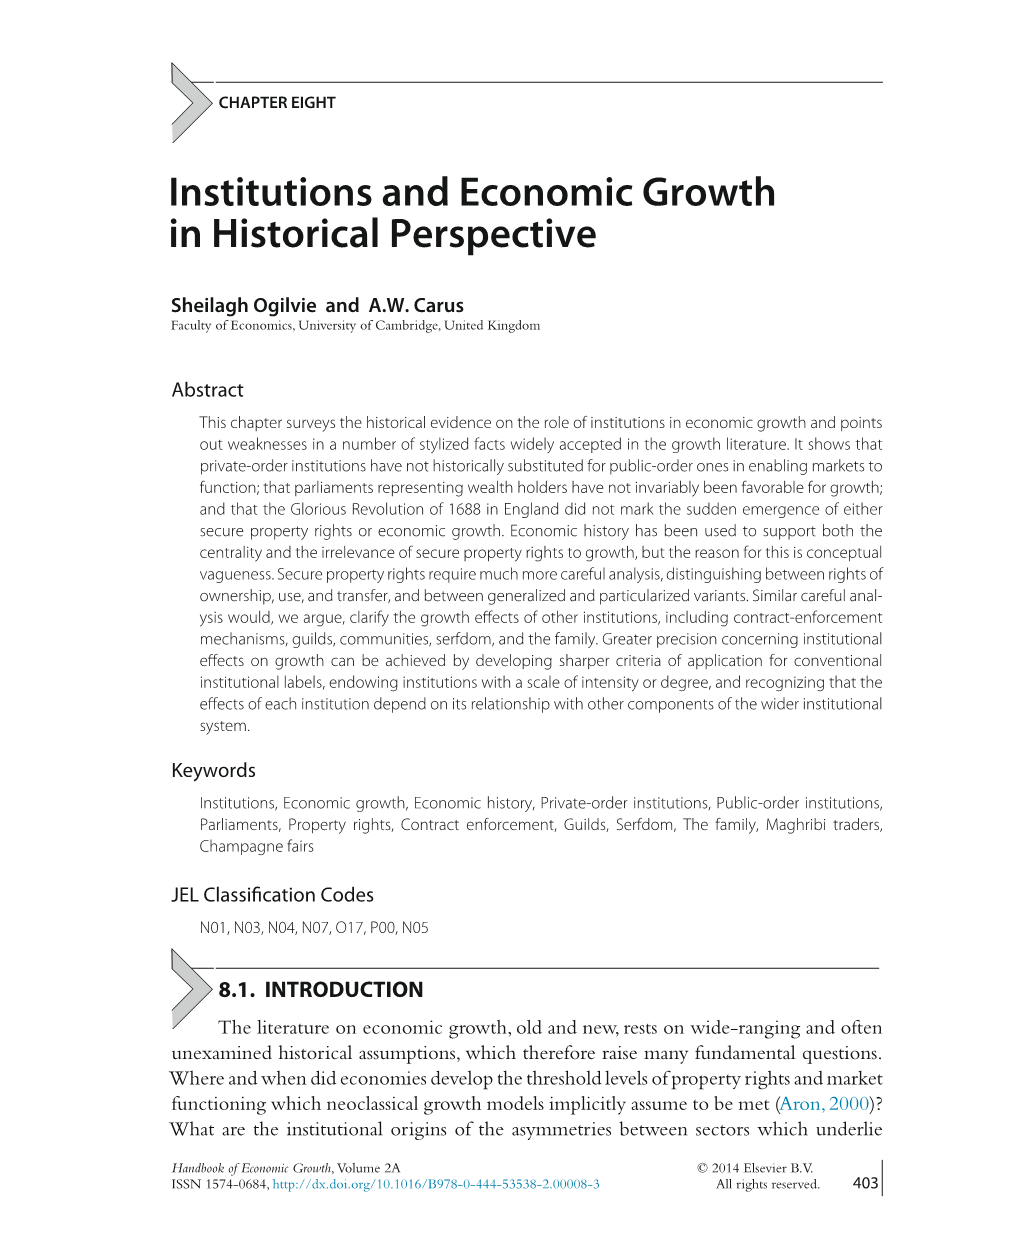 Institutions and Economic Growth in Historical Perspective